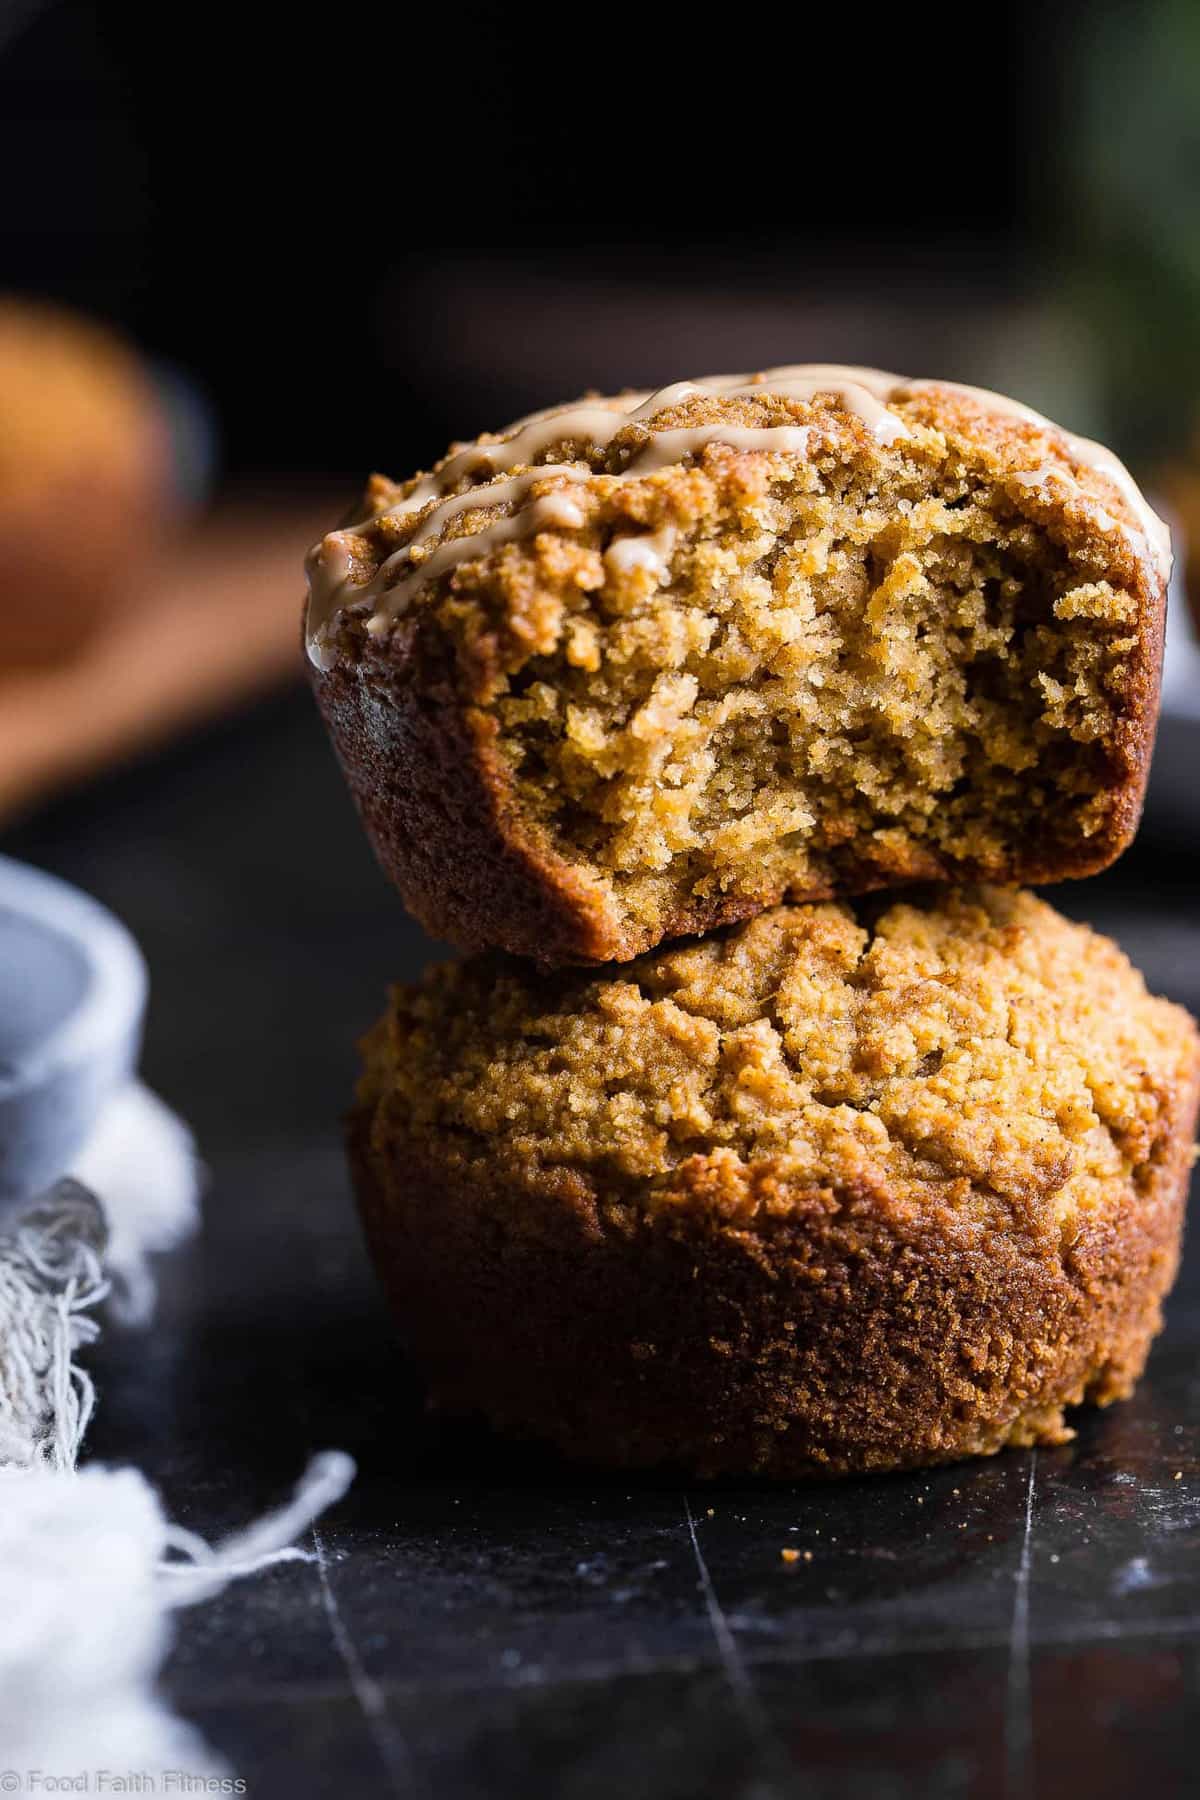 Paleo pumpkin muffins - These quick and easy, healthy almond flour pumpkin muffins are SO spicy-sweet and FLUFFY! A yummy, fall breakfast or snack that kids or adults will LOVE! | #Foodfaithfitness | #Glutenfree #Paleo #Healthy #Pumpkin #Muffins